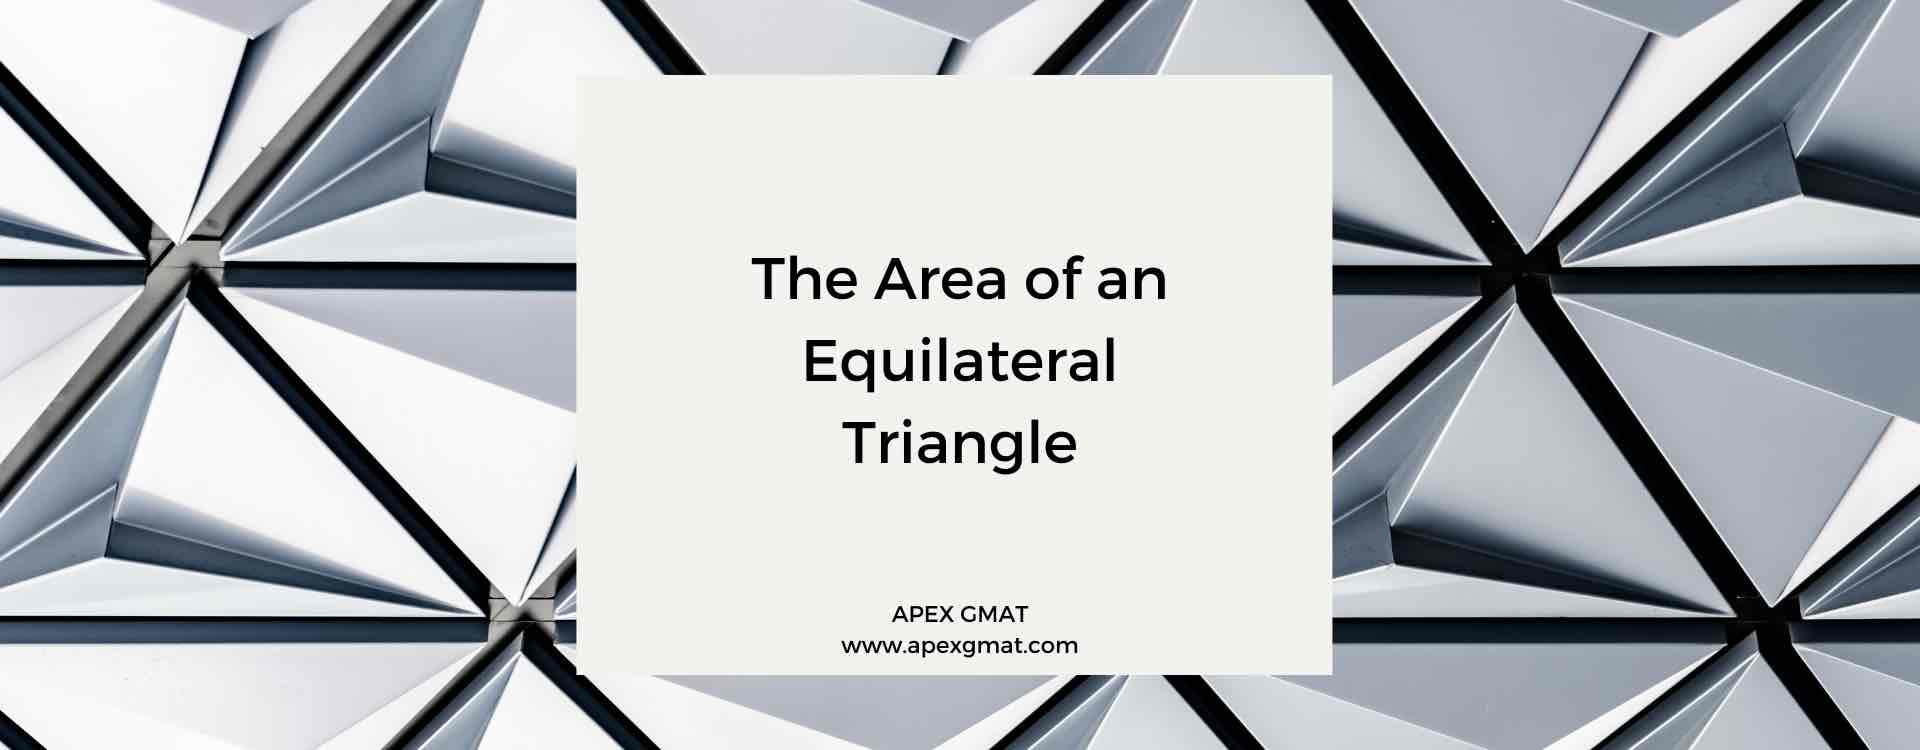 The Area of an Equilateral Triangle